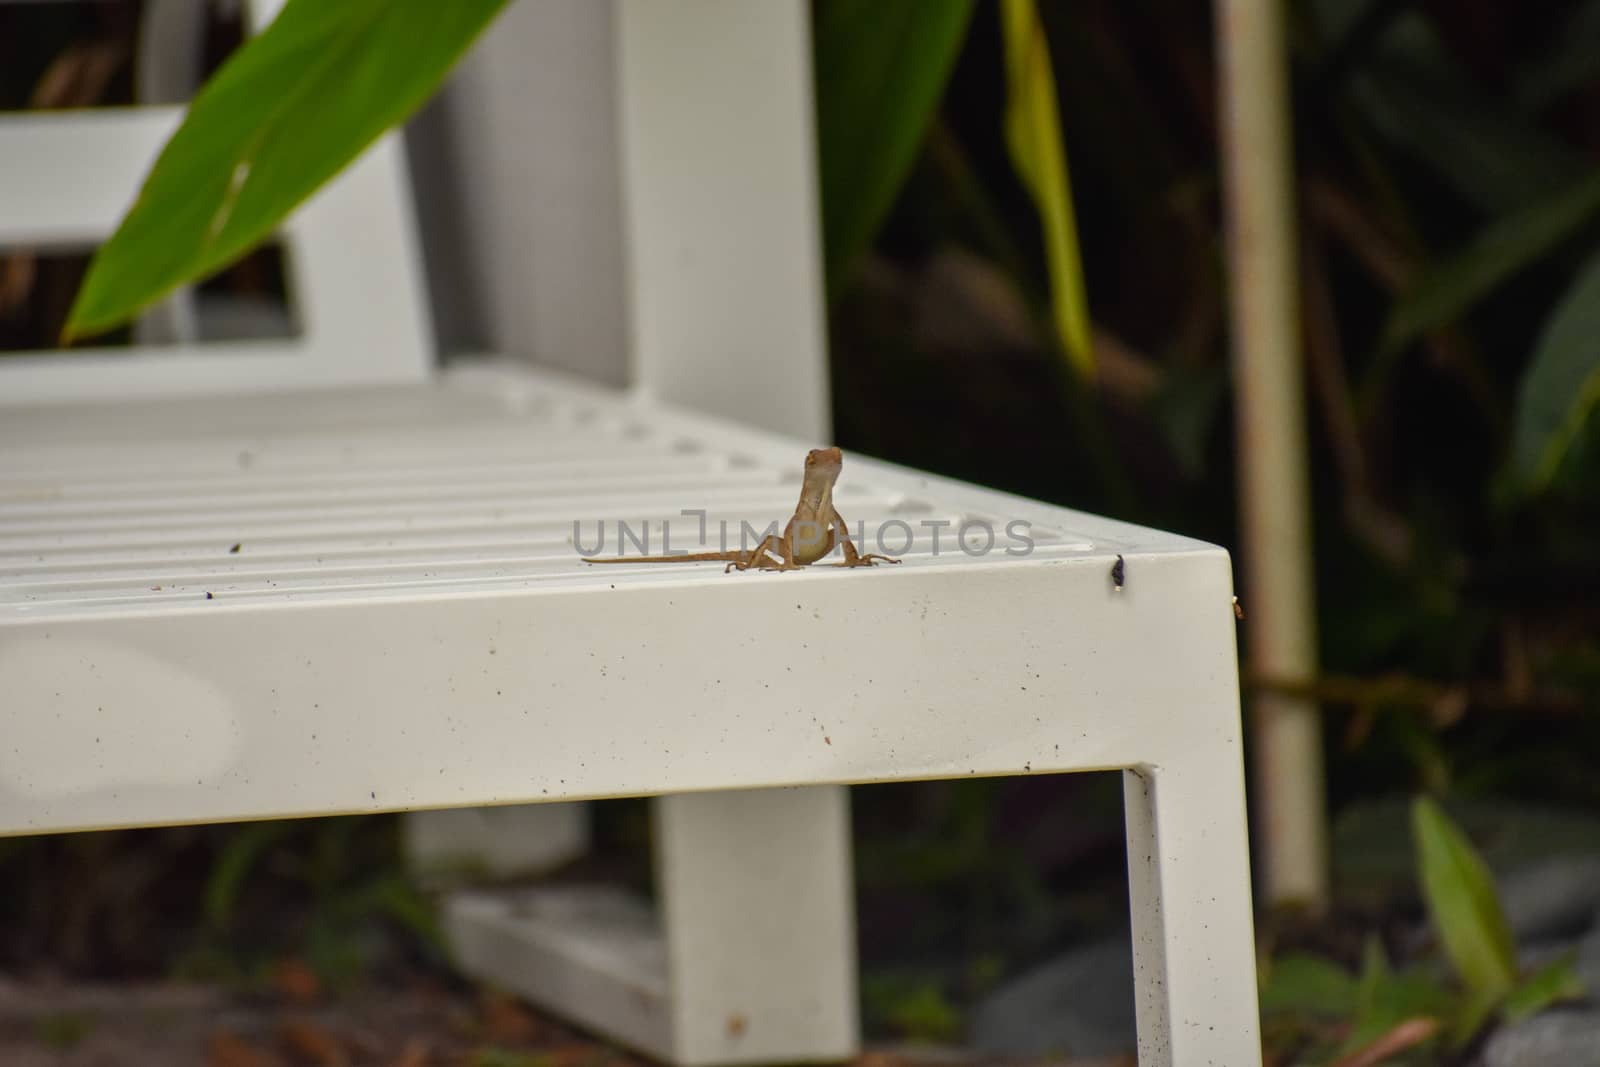 A Small Reptile Sitting on a White Lounge Chair in a Tropical Location